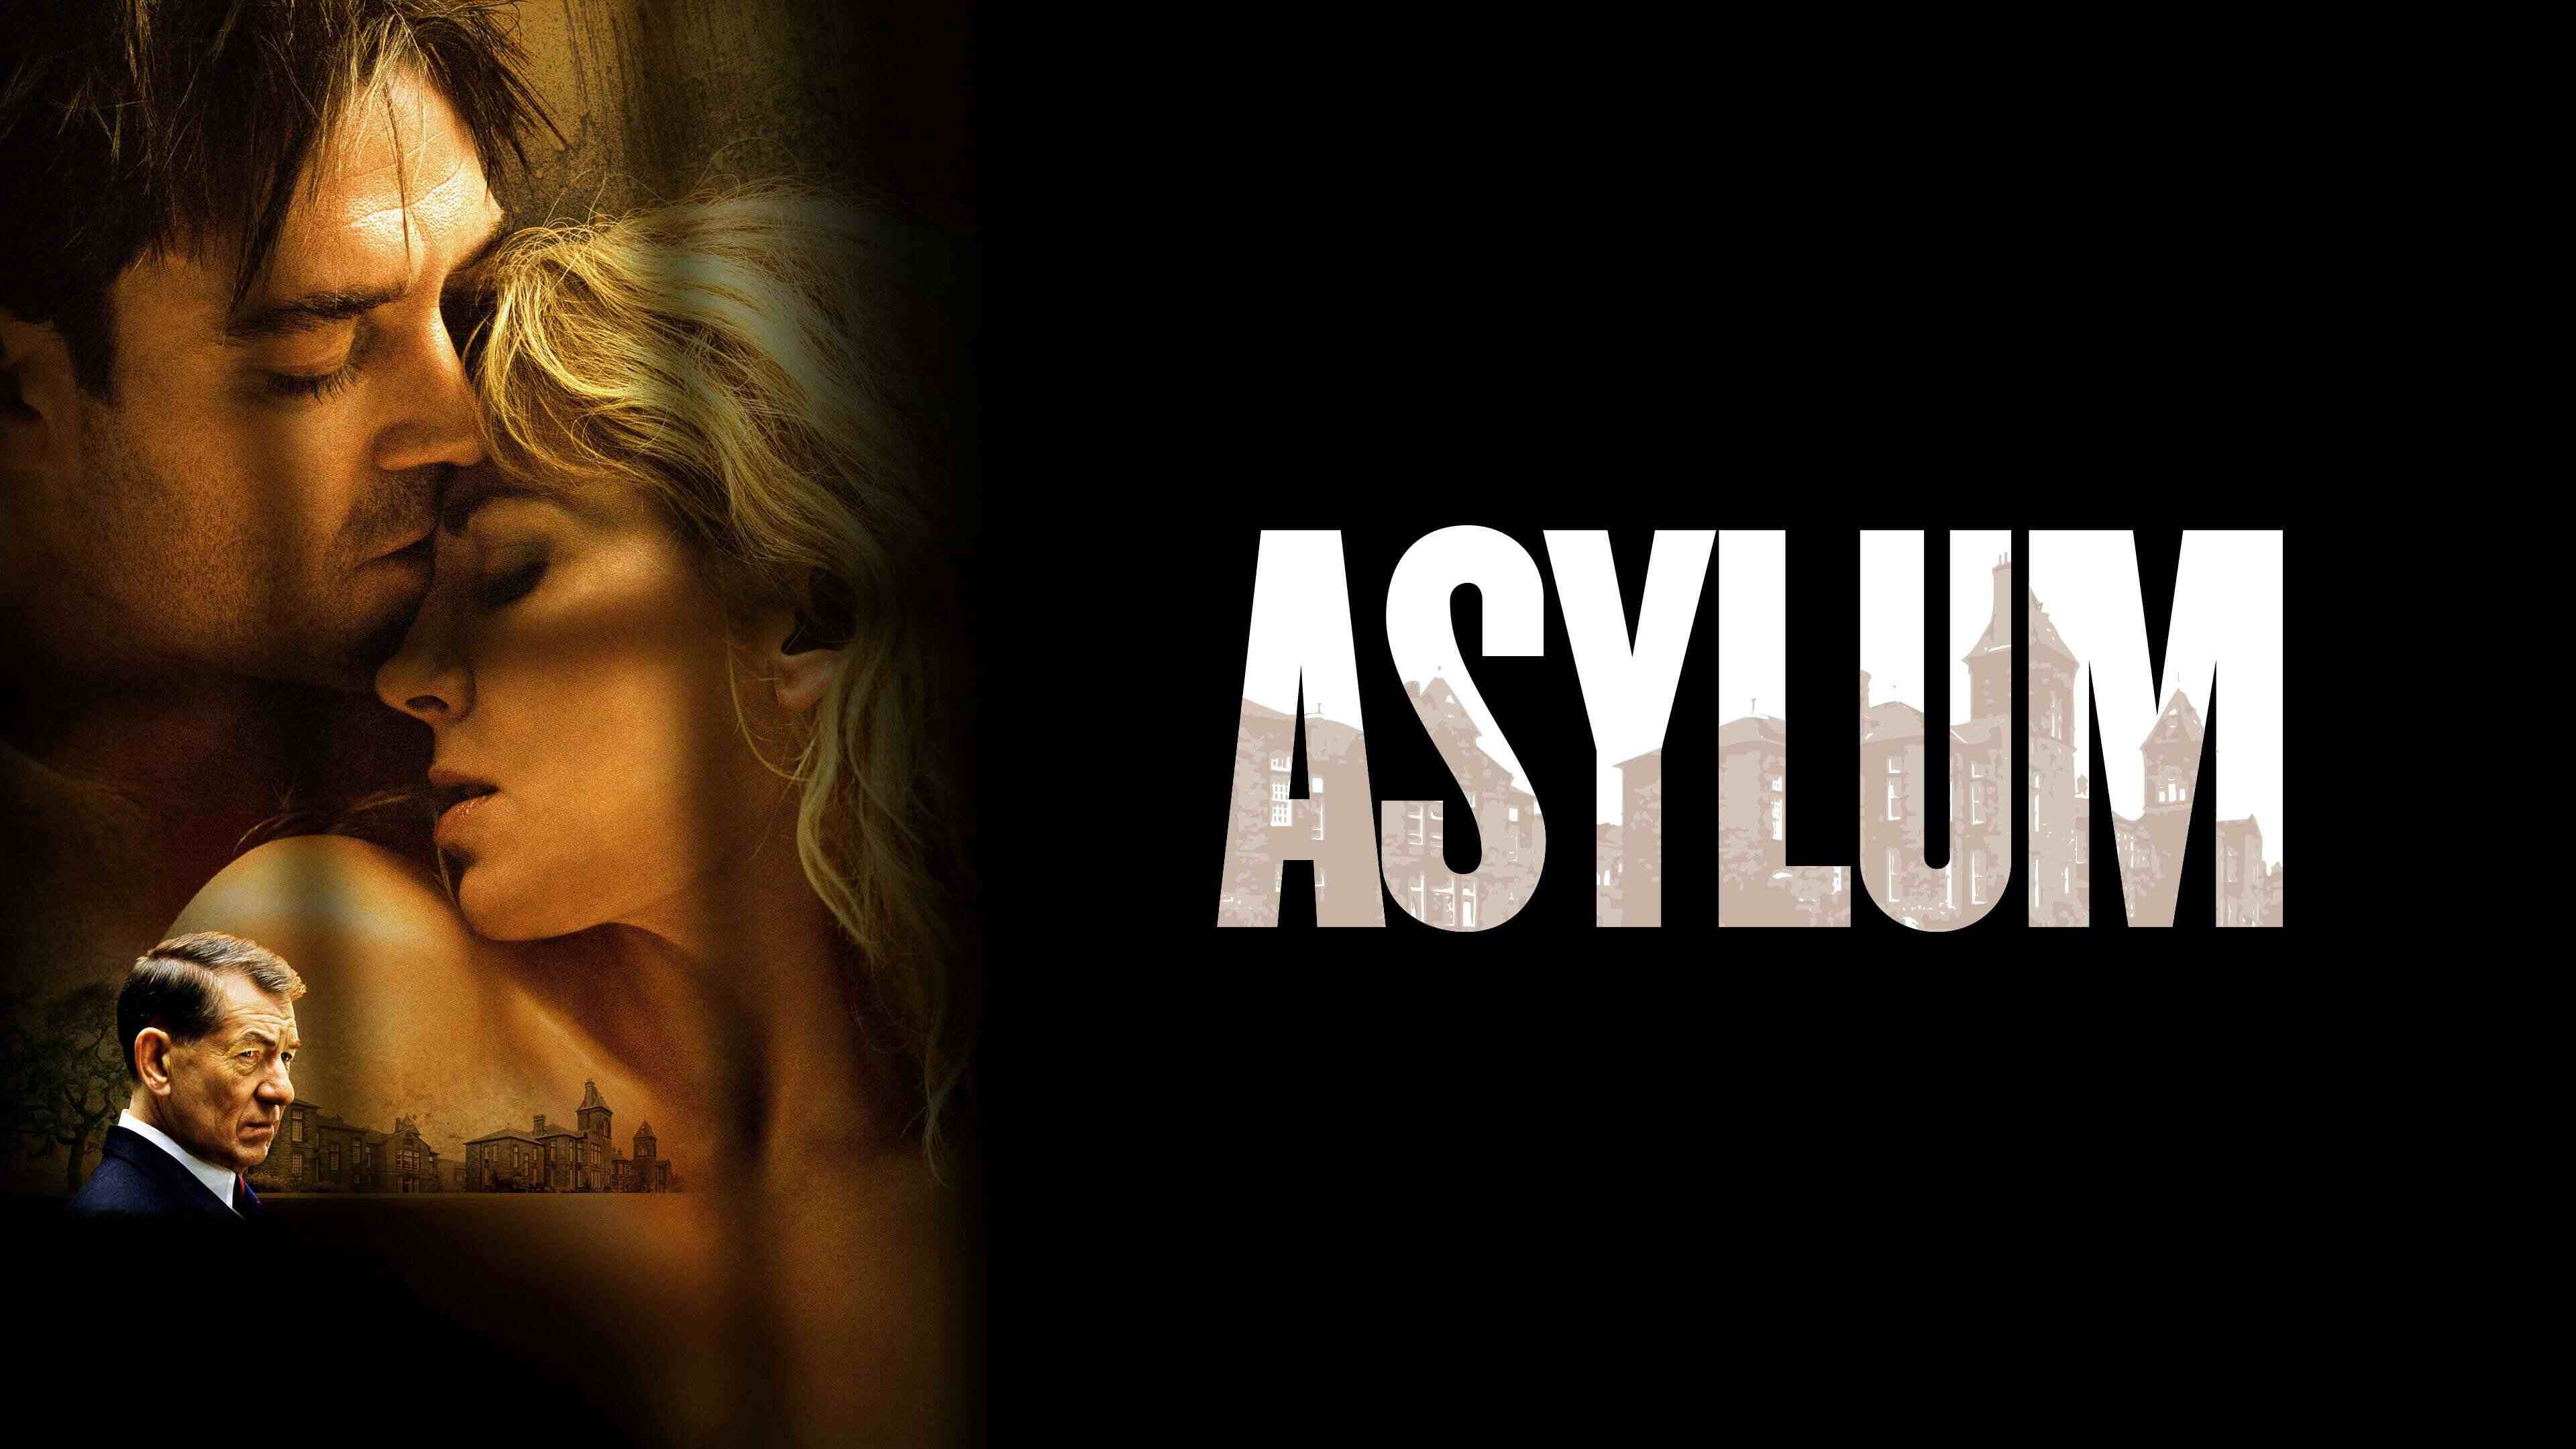 44-facts-about-the-movie-asylum